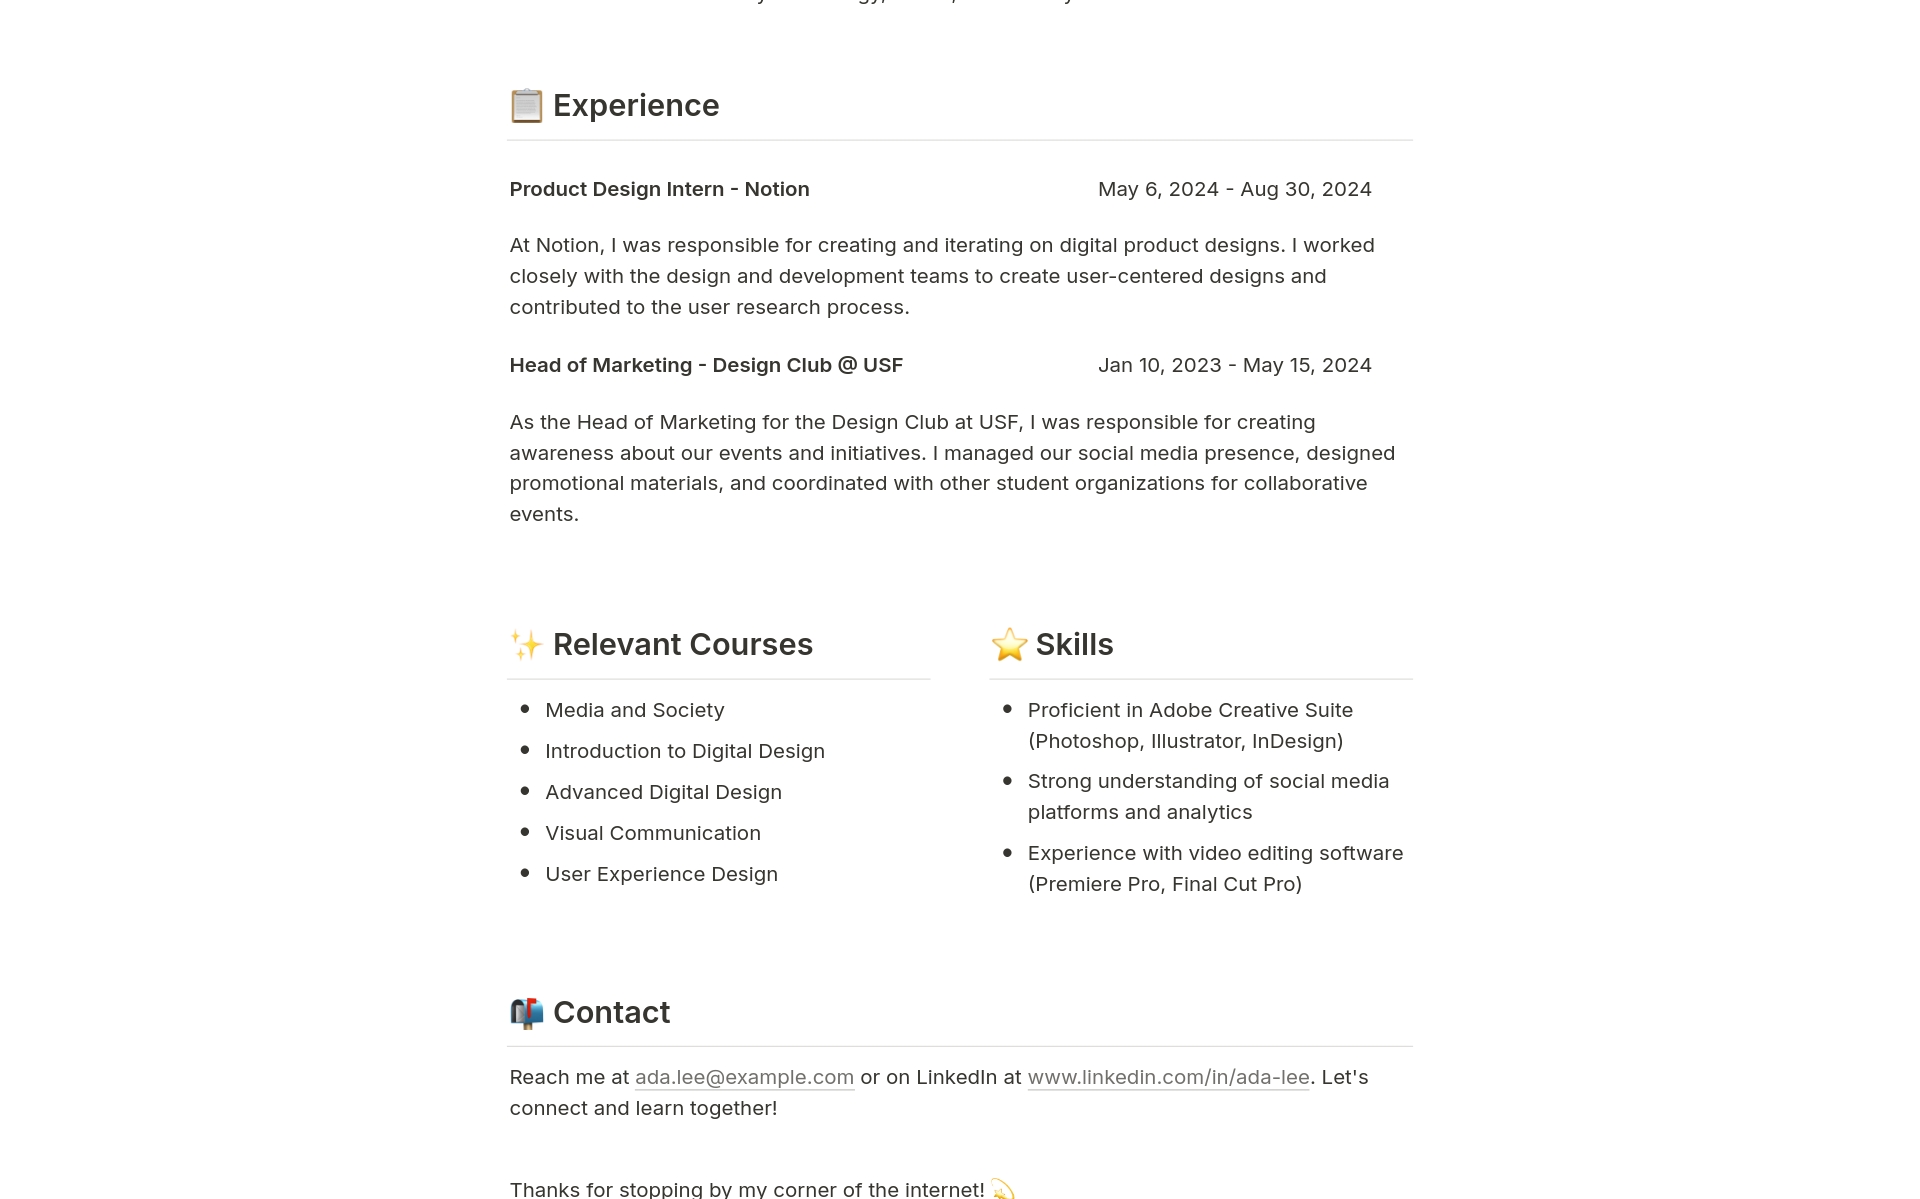 Build a beautiful, functional resume within your workspace and share it to the web.